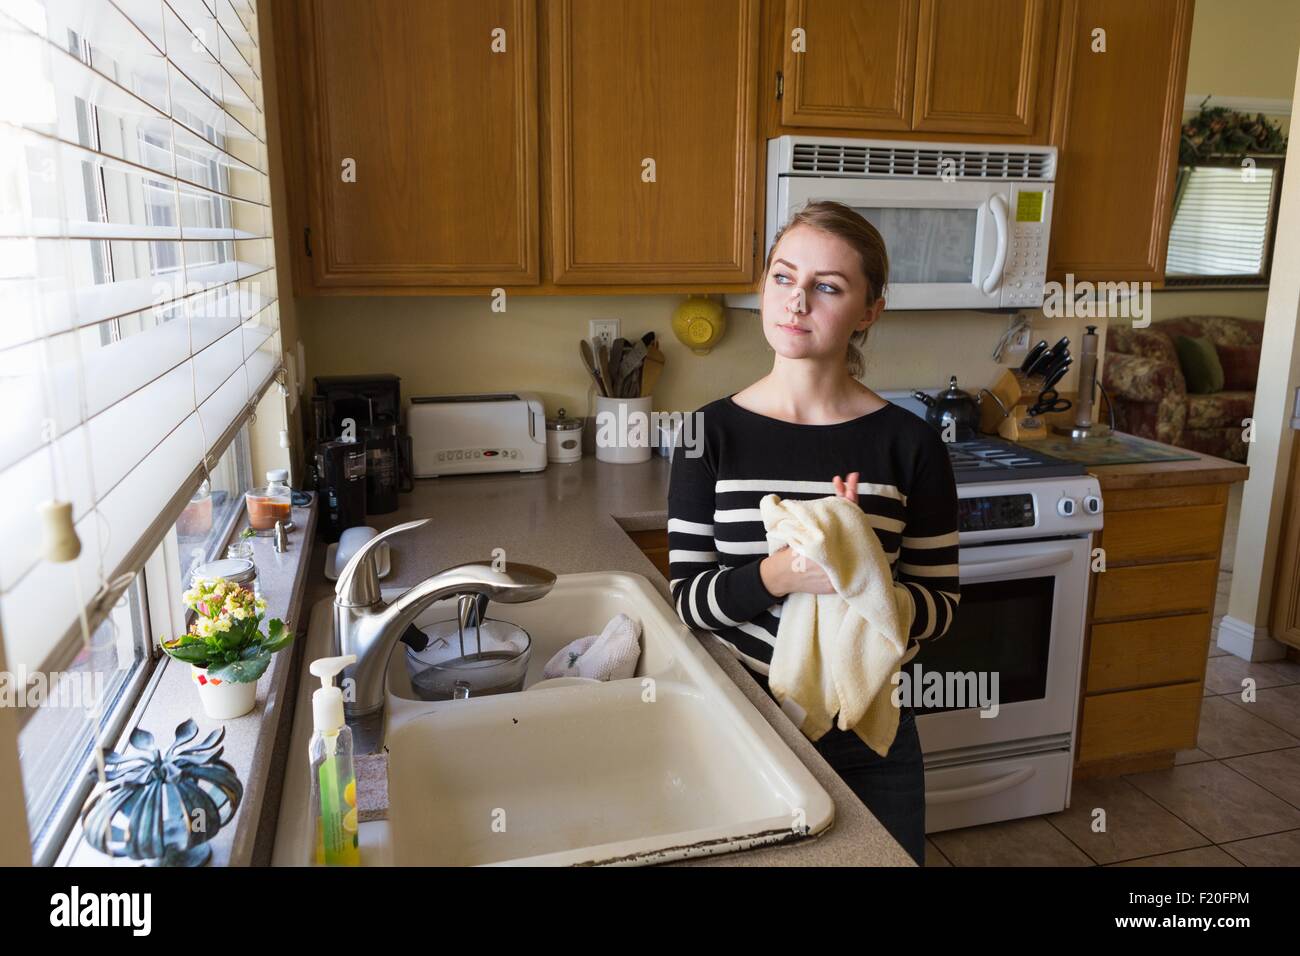 Woman daydreaming in kitchen Stock Photo